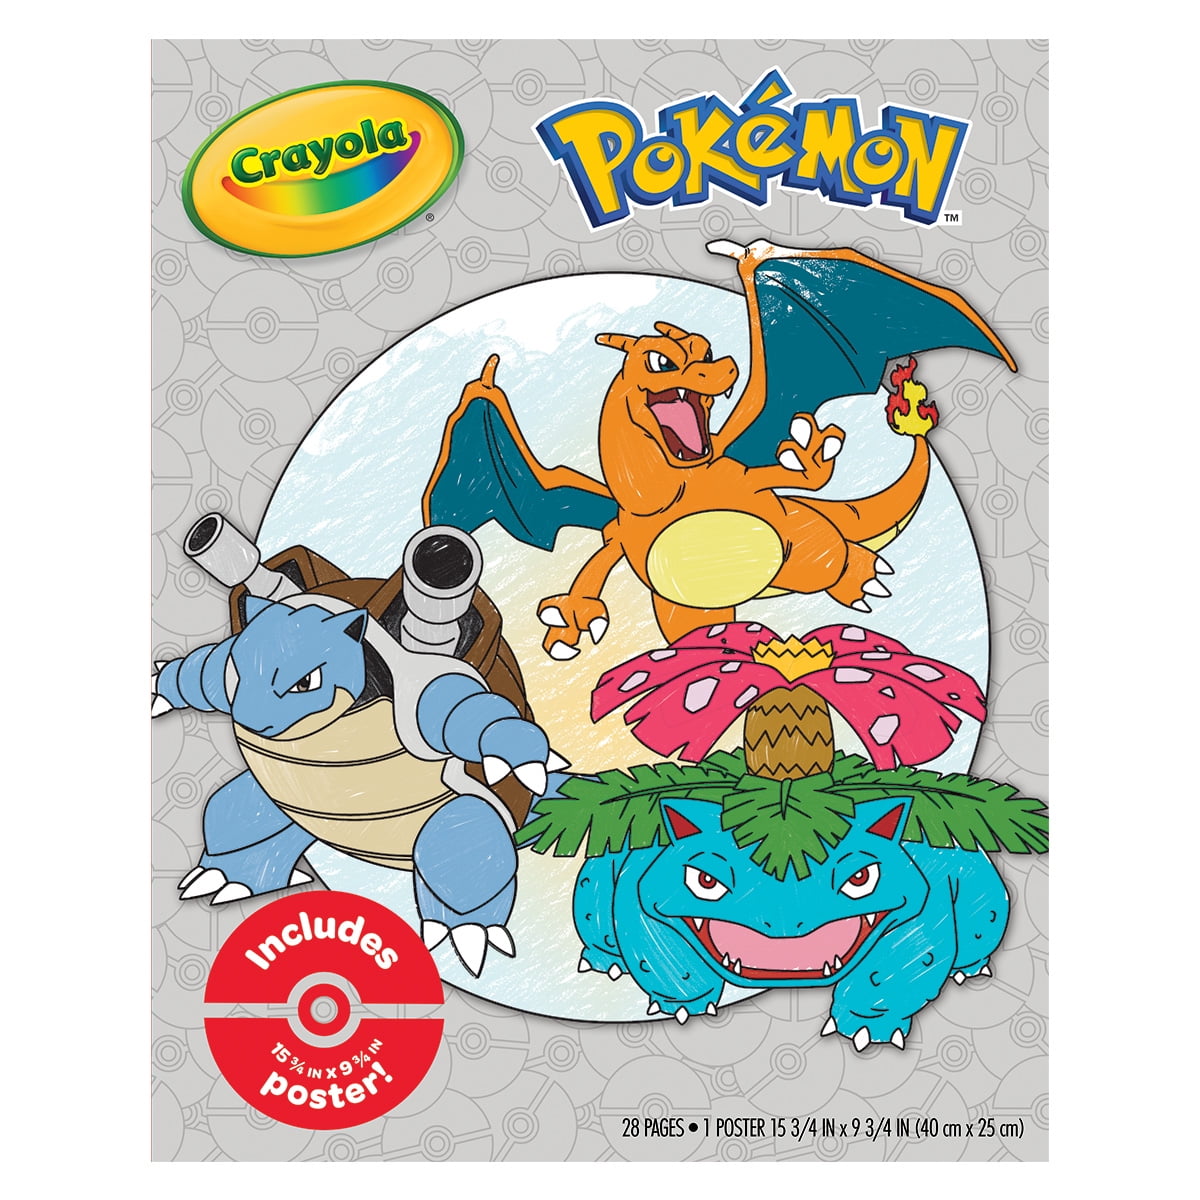 Crayola Pokmon Loose Leaf Coloring Pages, 28 Pages, Aged Up Coloring, Gifts for Kids, Ages 8+